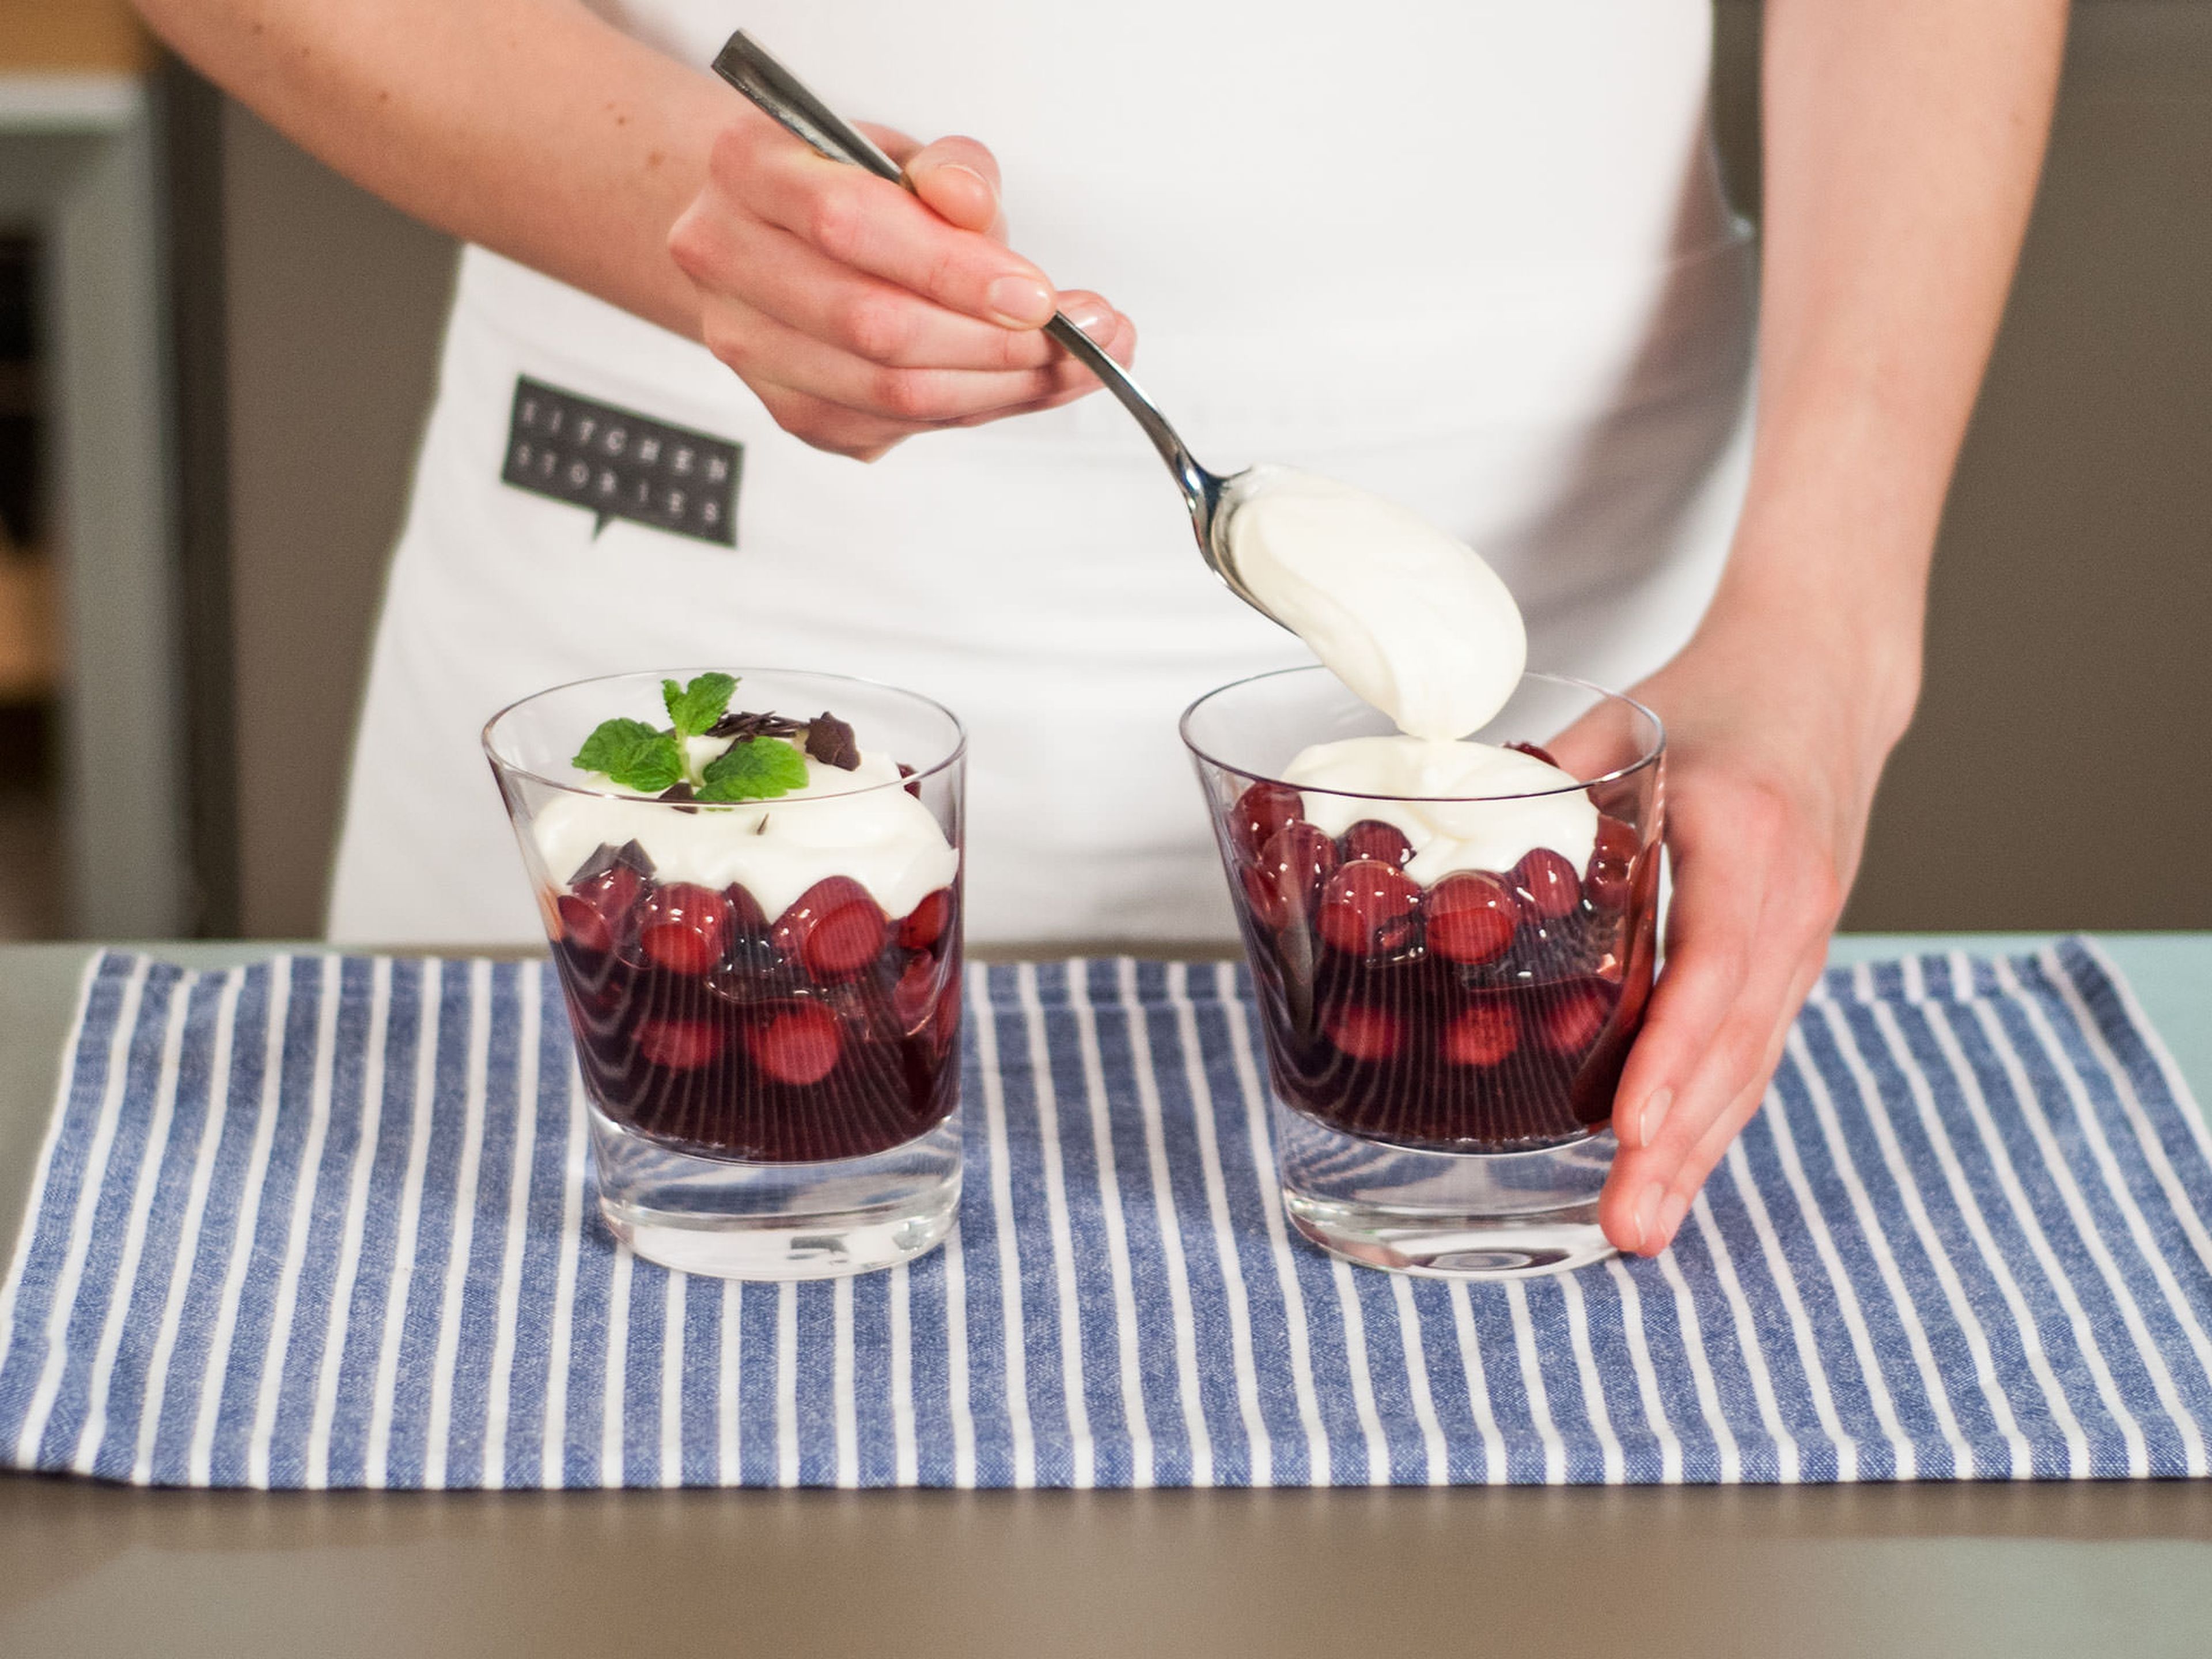 In a serving glass, layer the cake, cherry sauce, and whipped cream. Repeat. Garnish with mint and chocolate shavings. Enjoy!